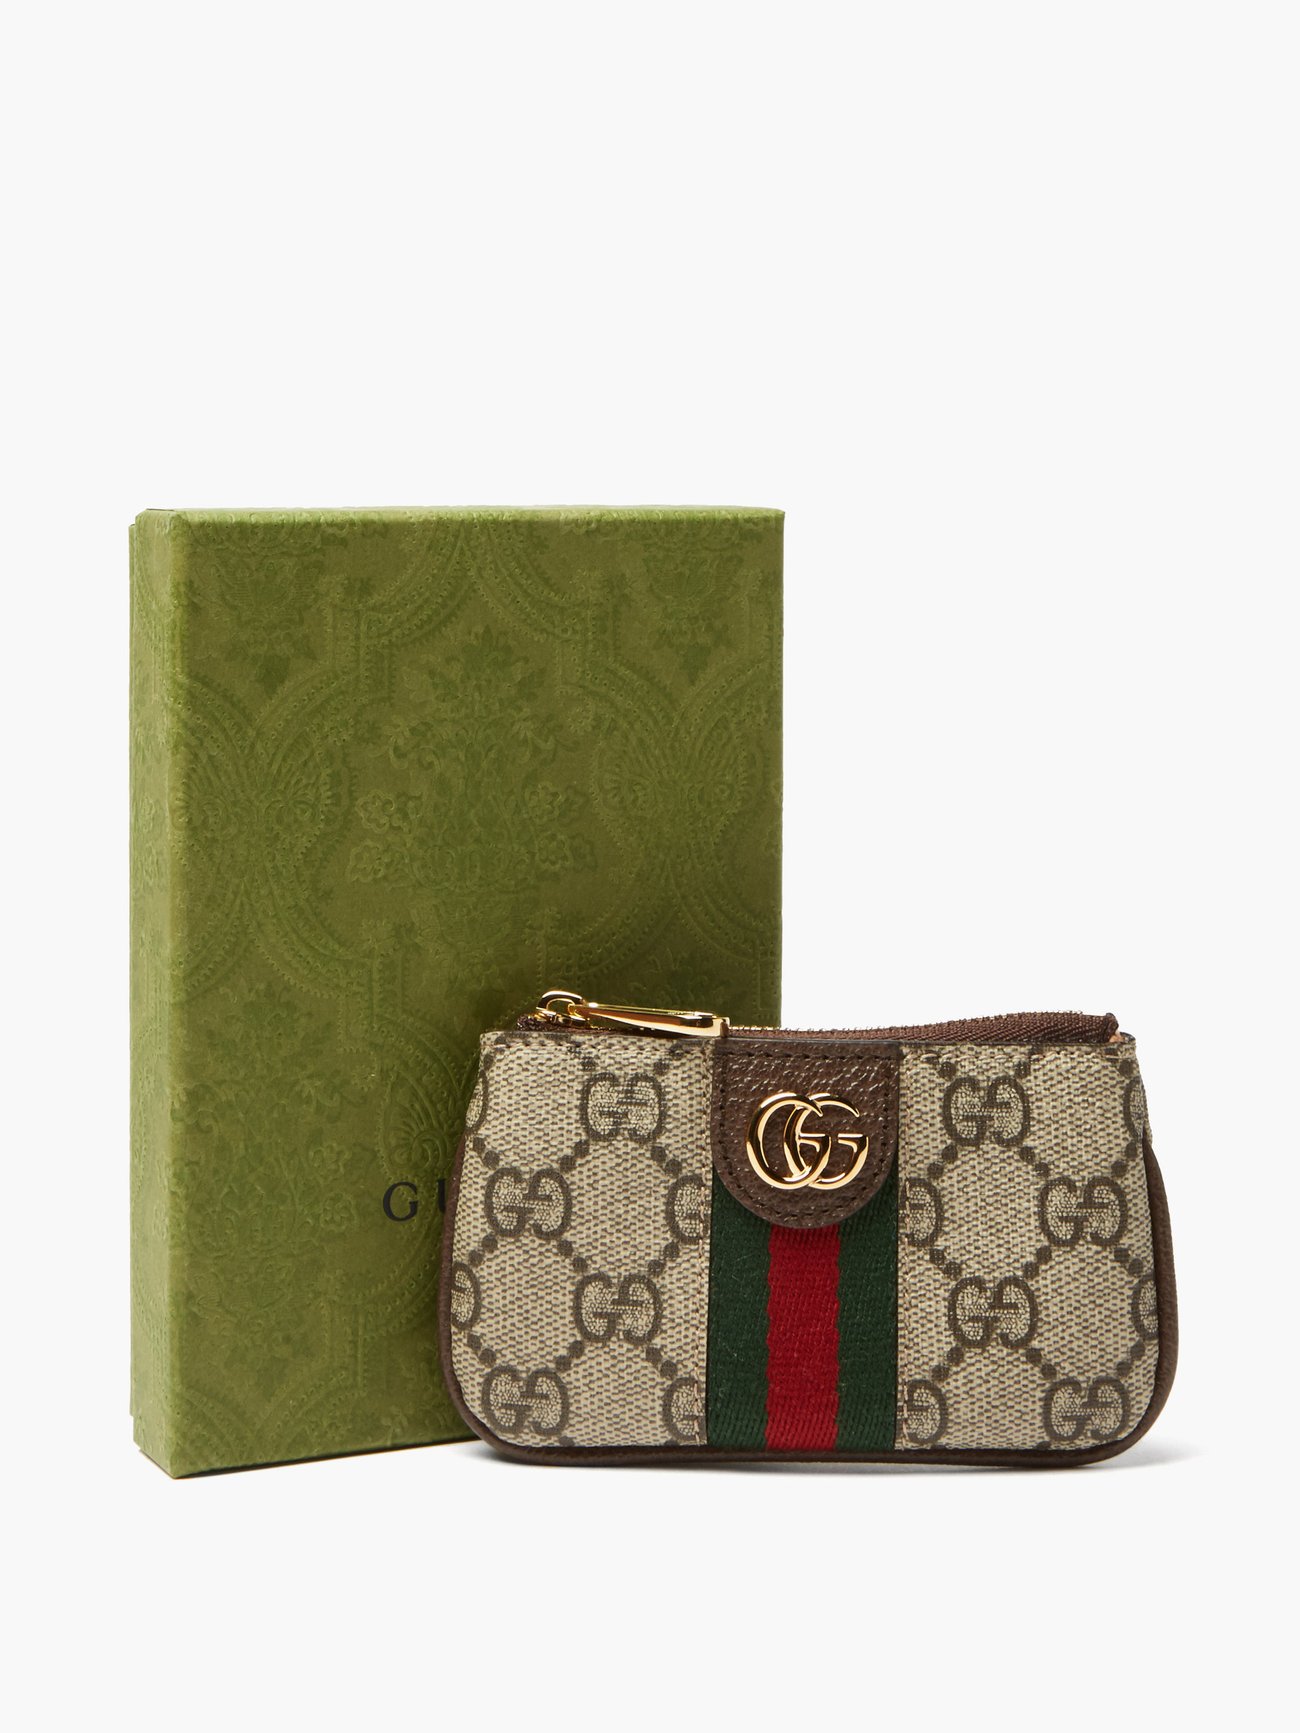 Gucci Ophidia Gg Supreme Headphone-case Key Ring - ShopStyle